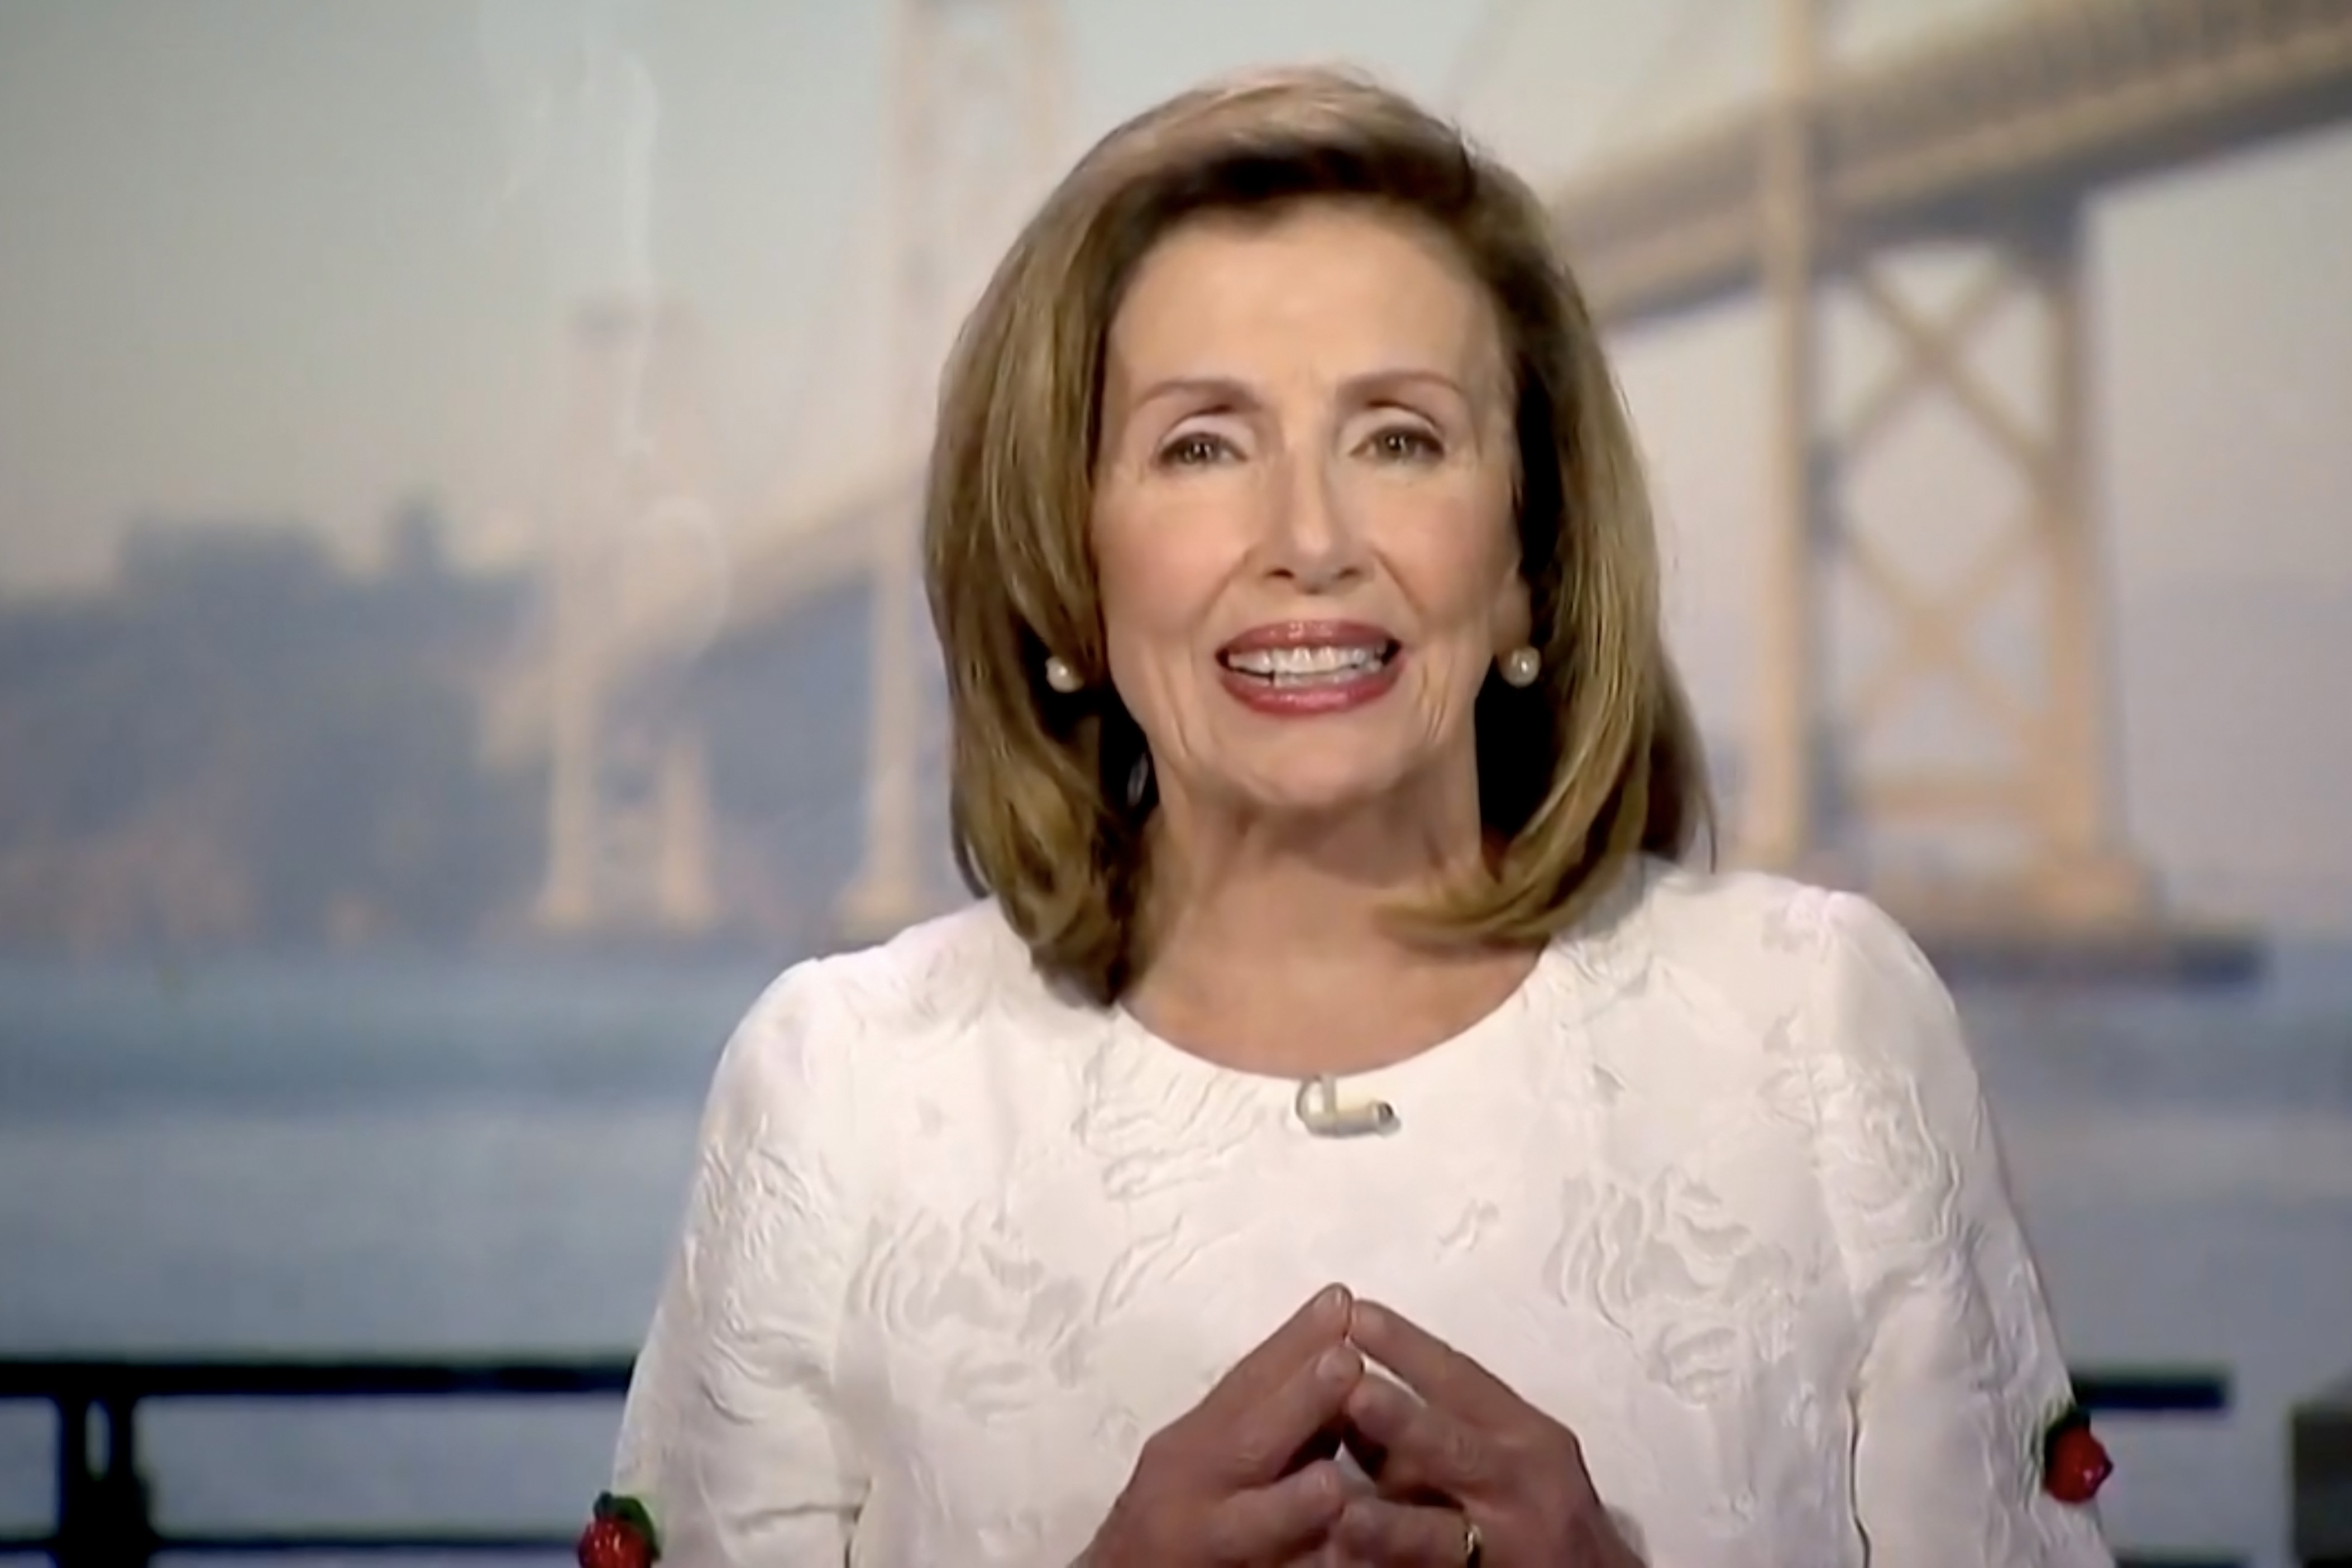 In surprise endorsement that roils party’s left wing, Pelosi throws